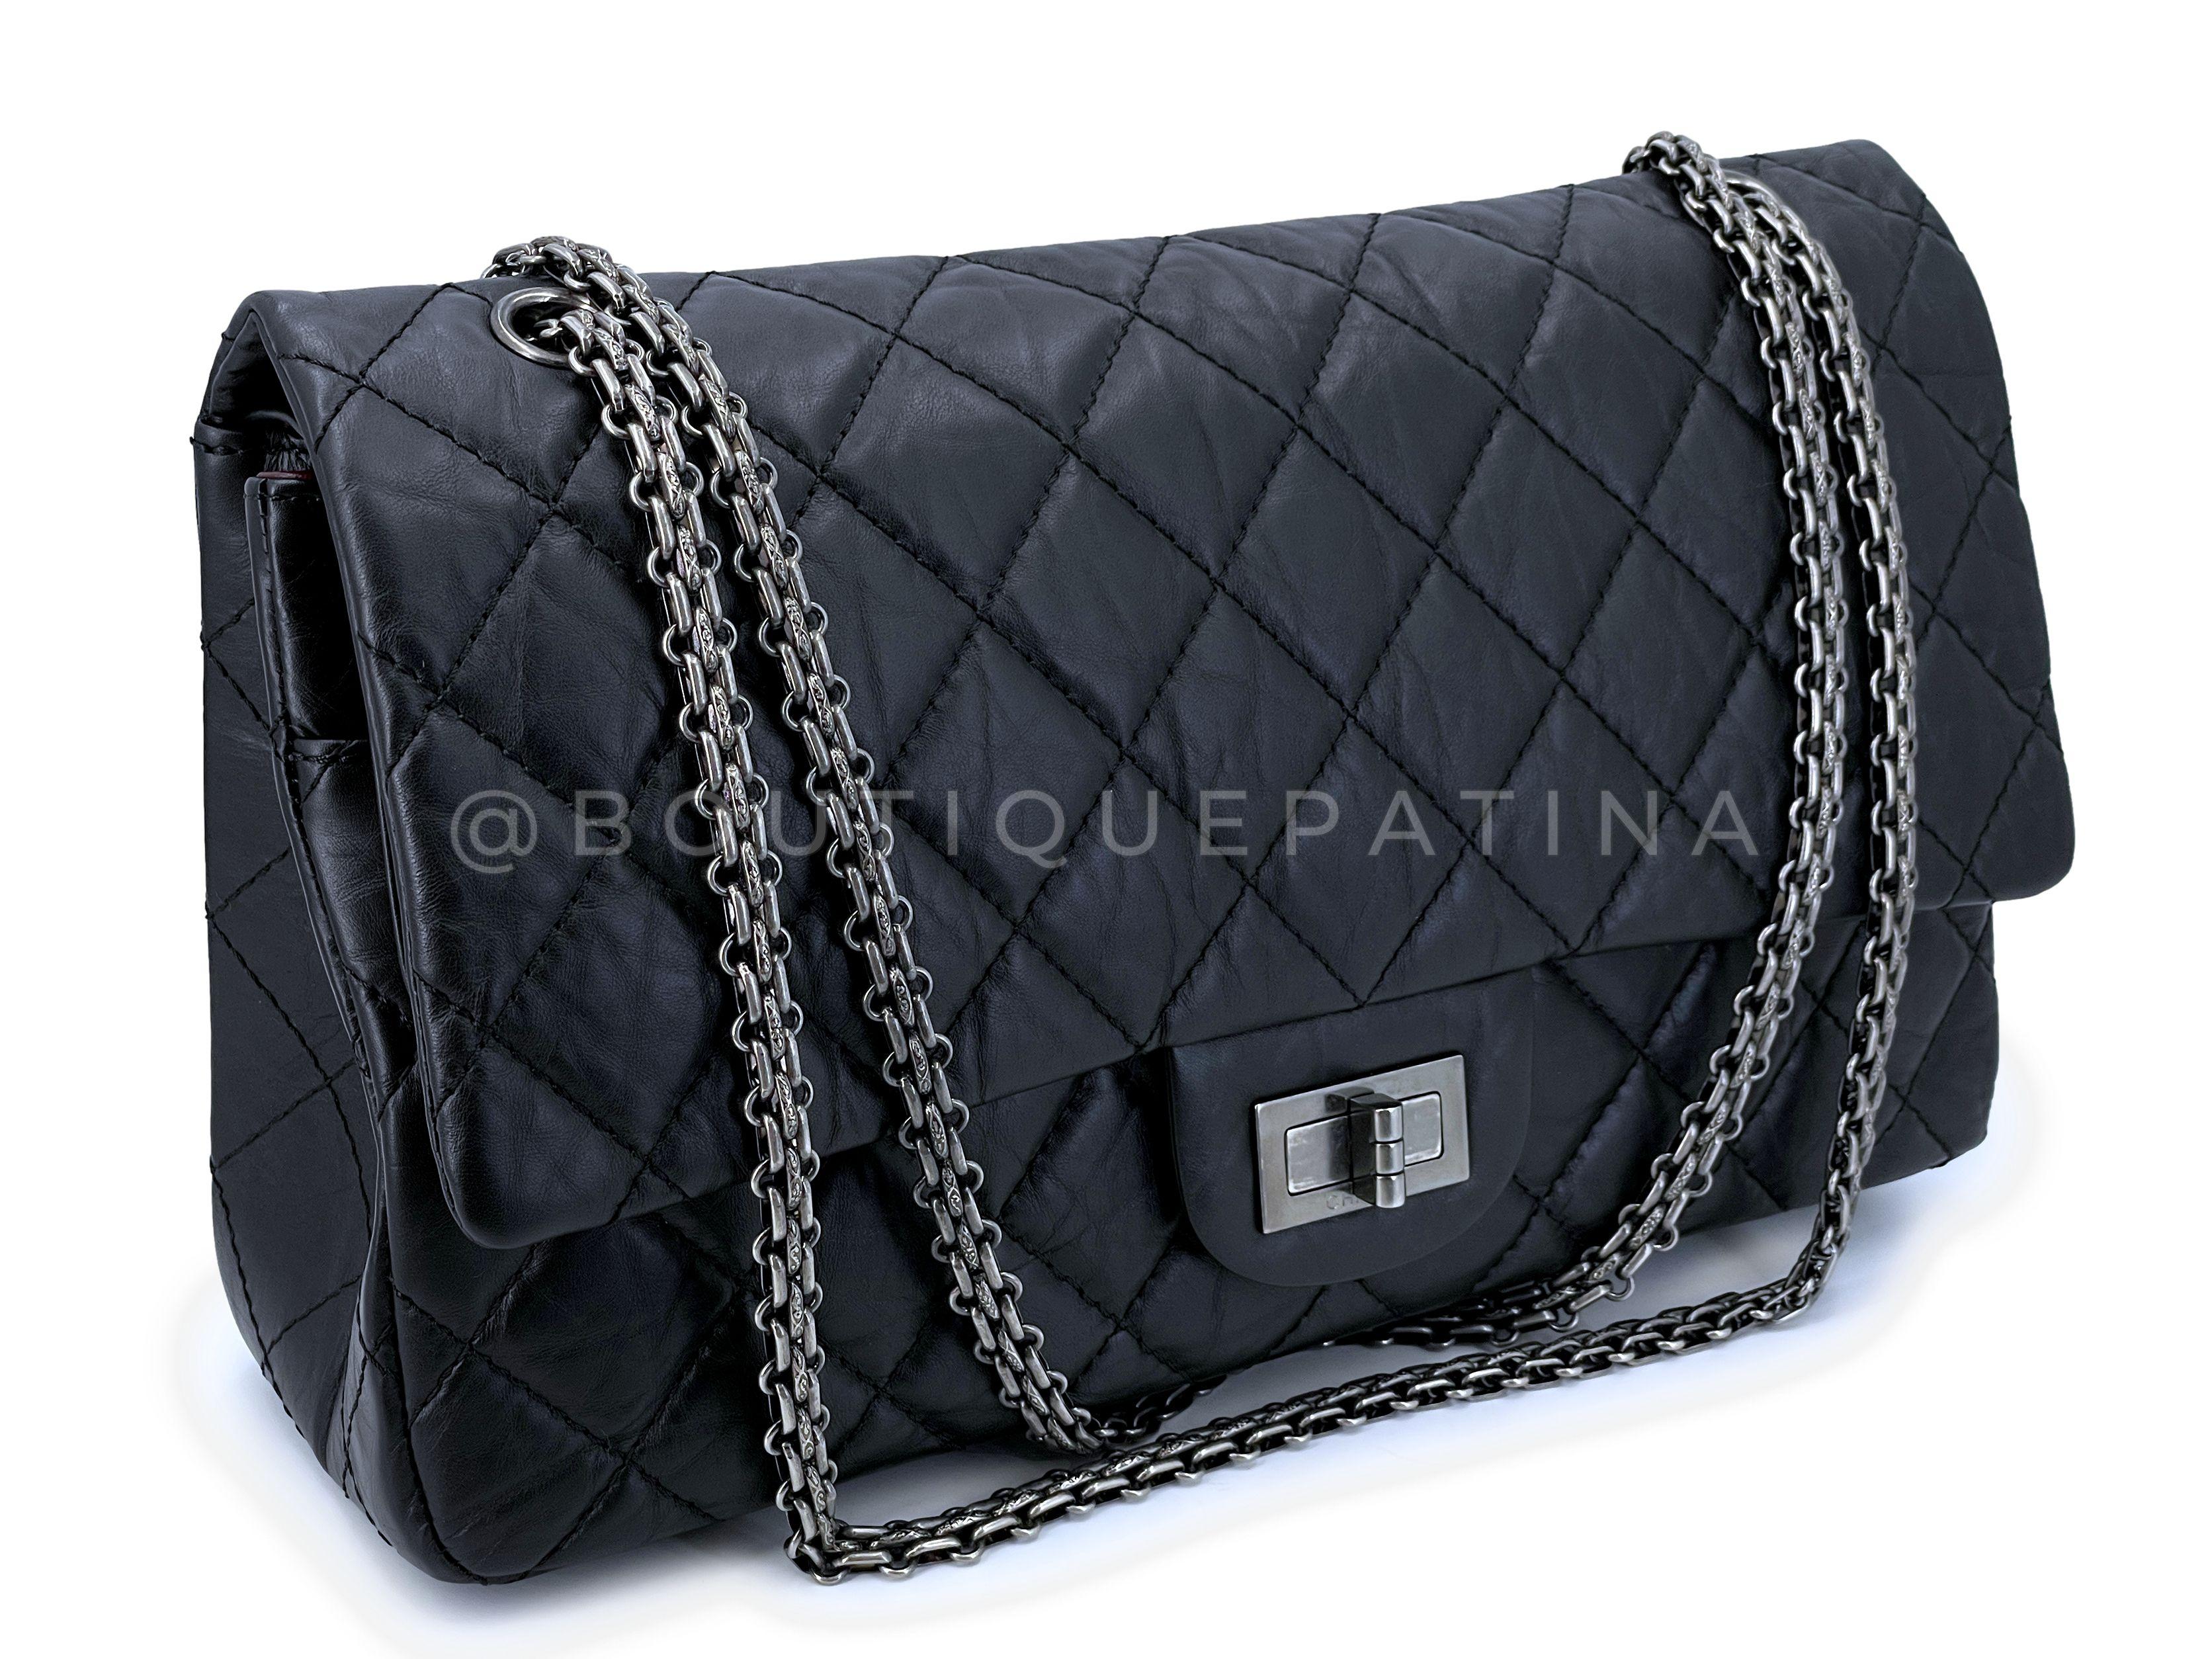 Store item: 66176
From 2011, an era of superior craftsmanship, our Pristine Chanel Black Aged Calfskin Reissue Large 227 2.55 Flap Bag RHW  is offered in pristine condition with a matte hand and clean, crisp edges, free of lower front/back creasing